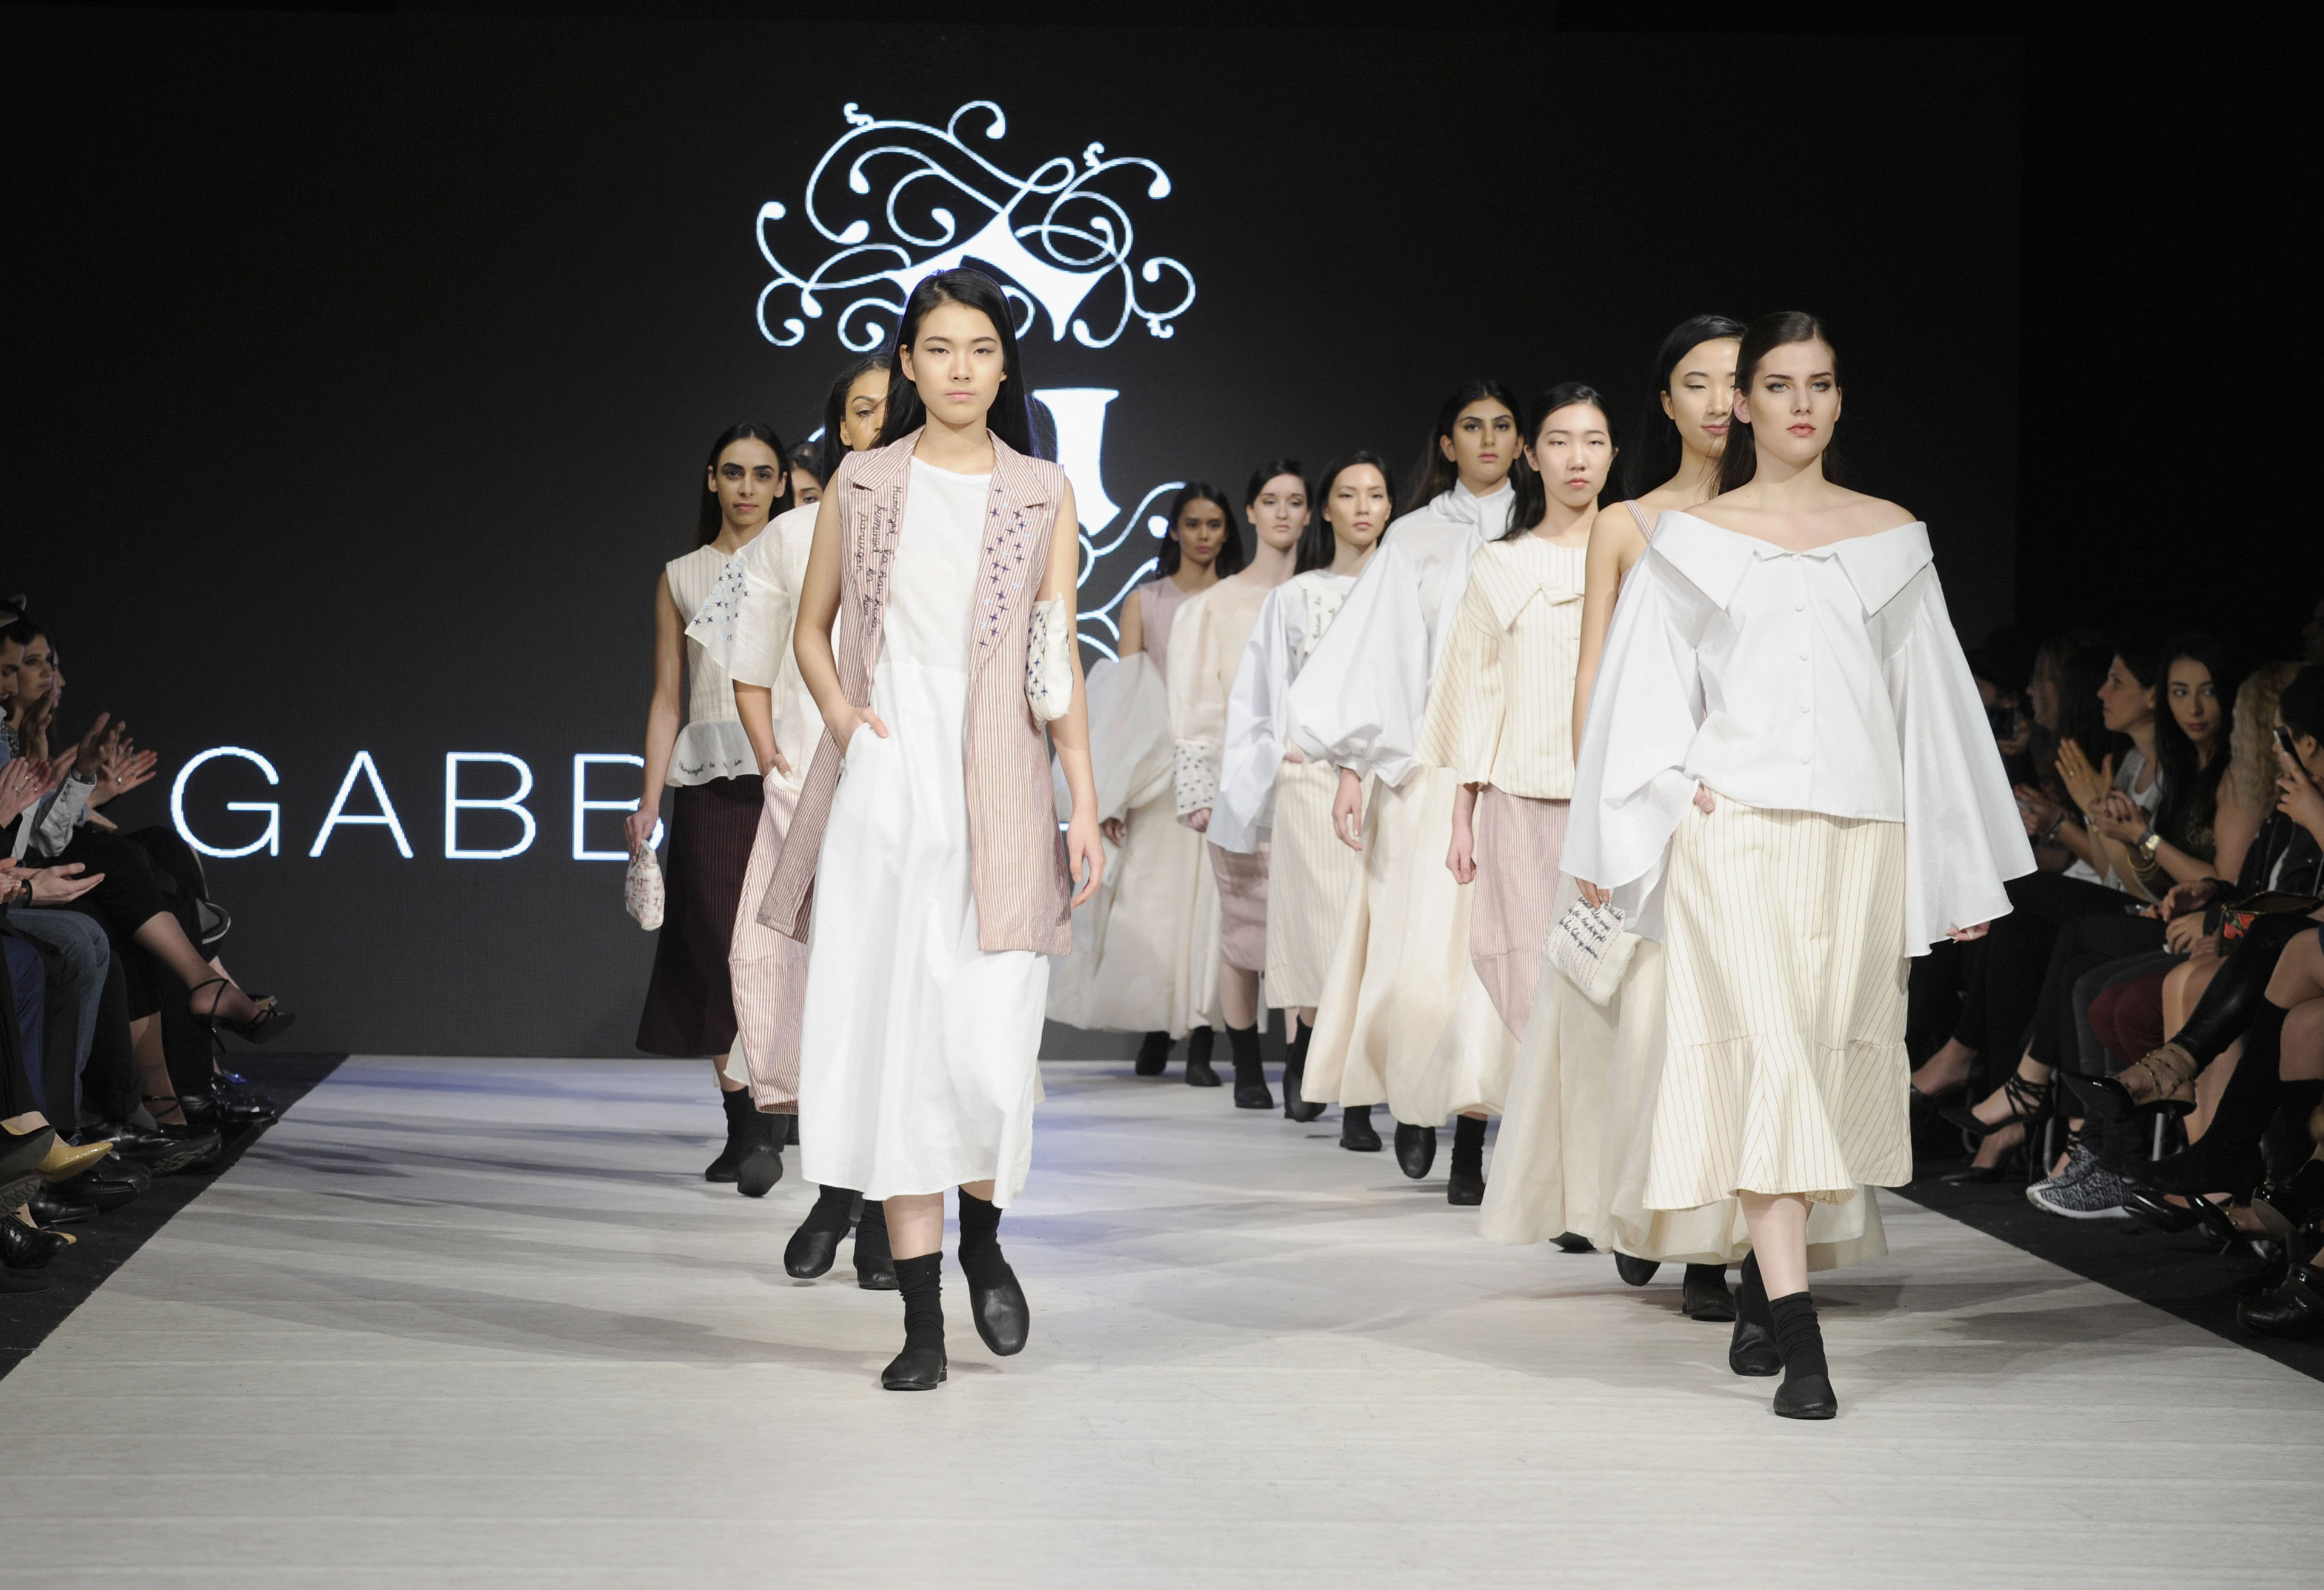 VANCOUVER, BC - MARCH 23:  Models walk the runway wearing Gabbie Sarenas at Vancouver Fashion Week Fall/Winter 2017 at Chinese Cultural Centre of Greater Vancouver on March 23, 2017 in Vancouver, Canada.  (Photo by Arun Nevader/WireImage)